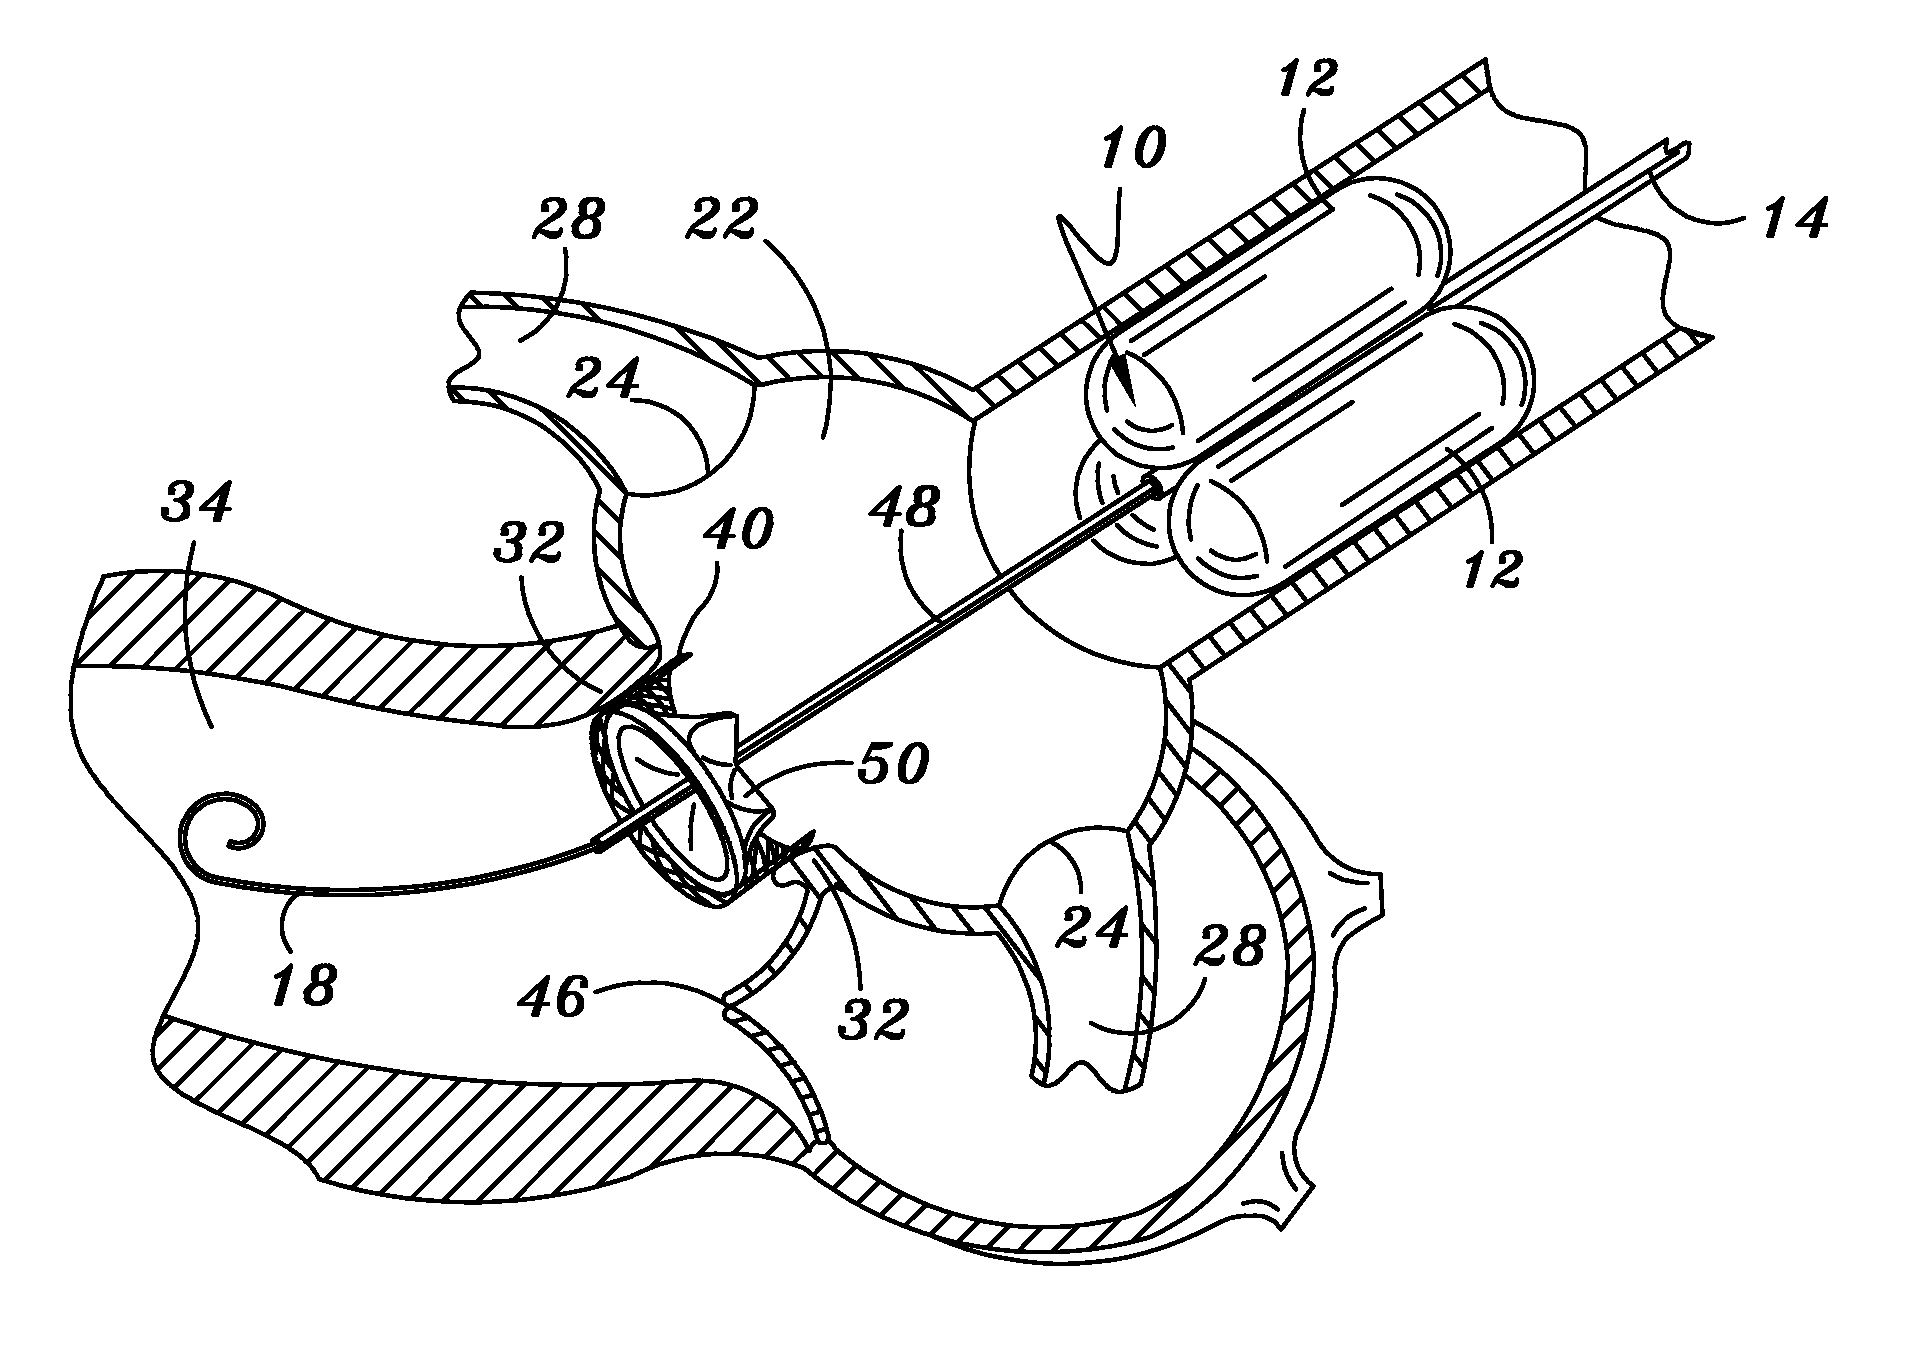 Method and Apparatus for Percutaneous Aortic Valve Replacement